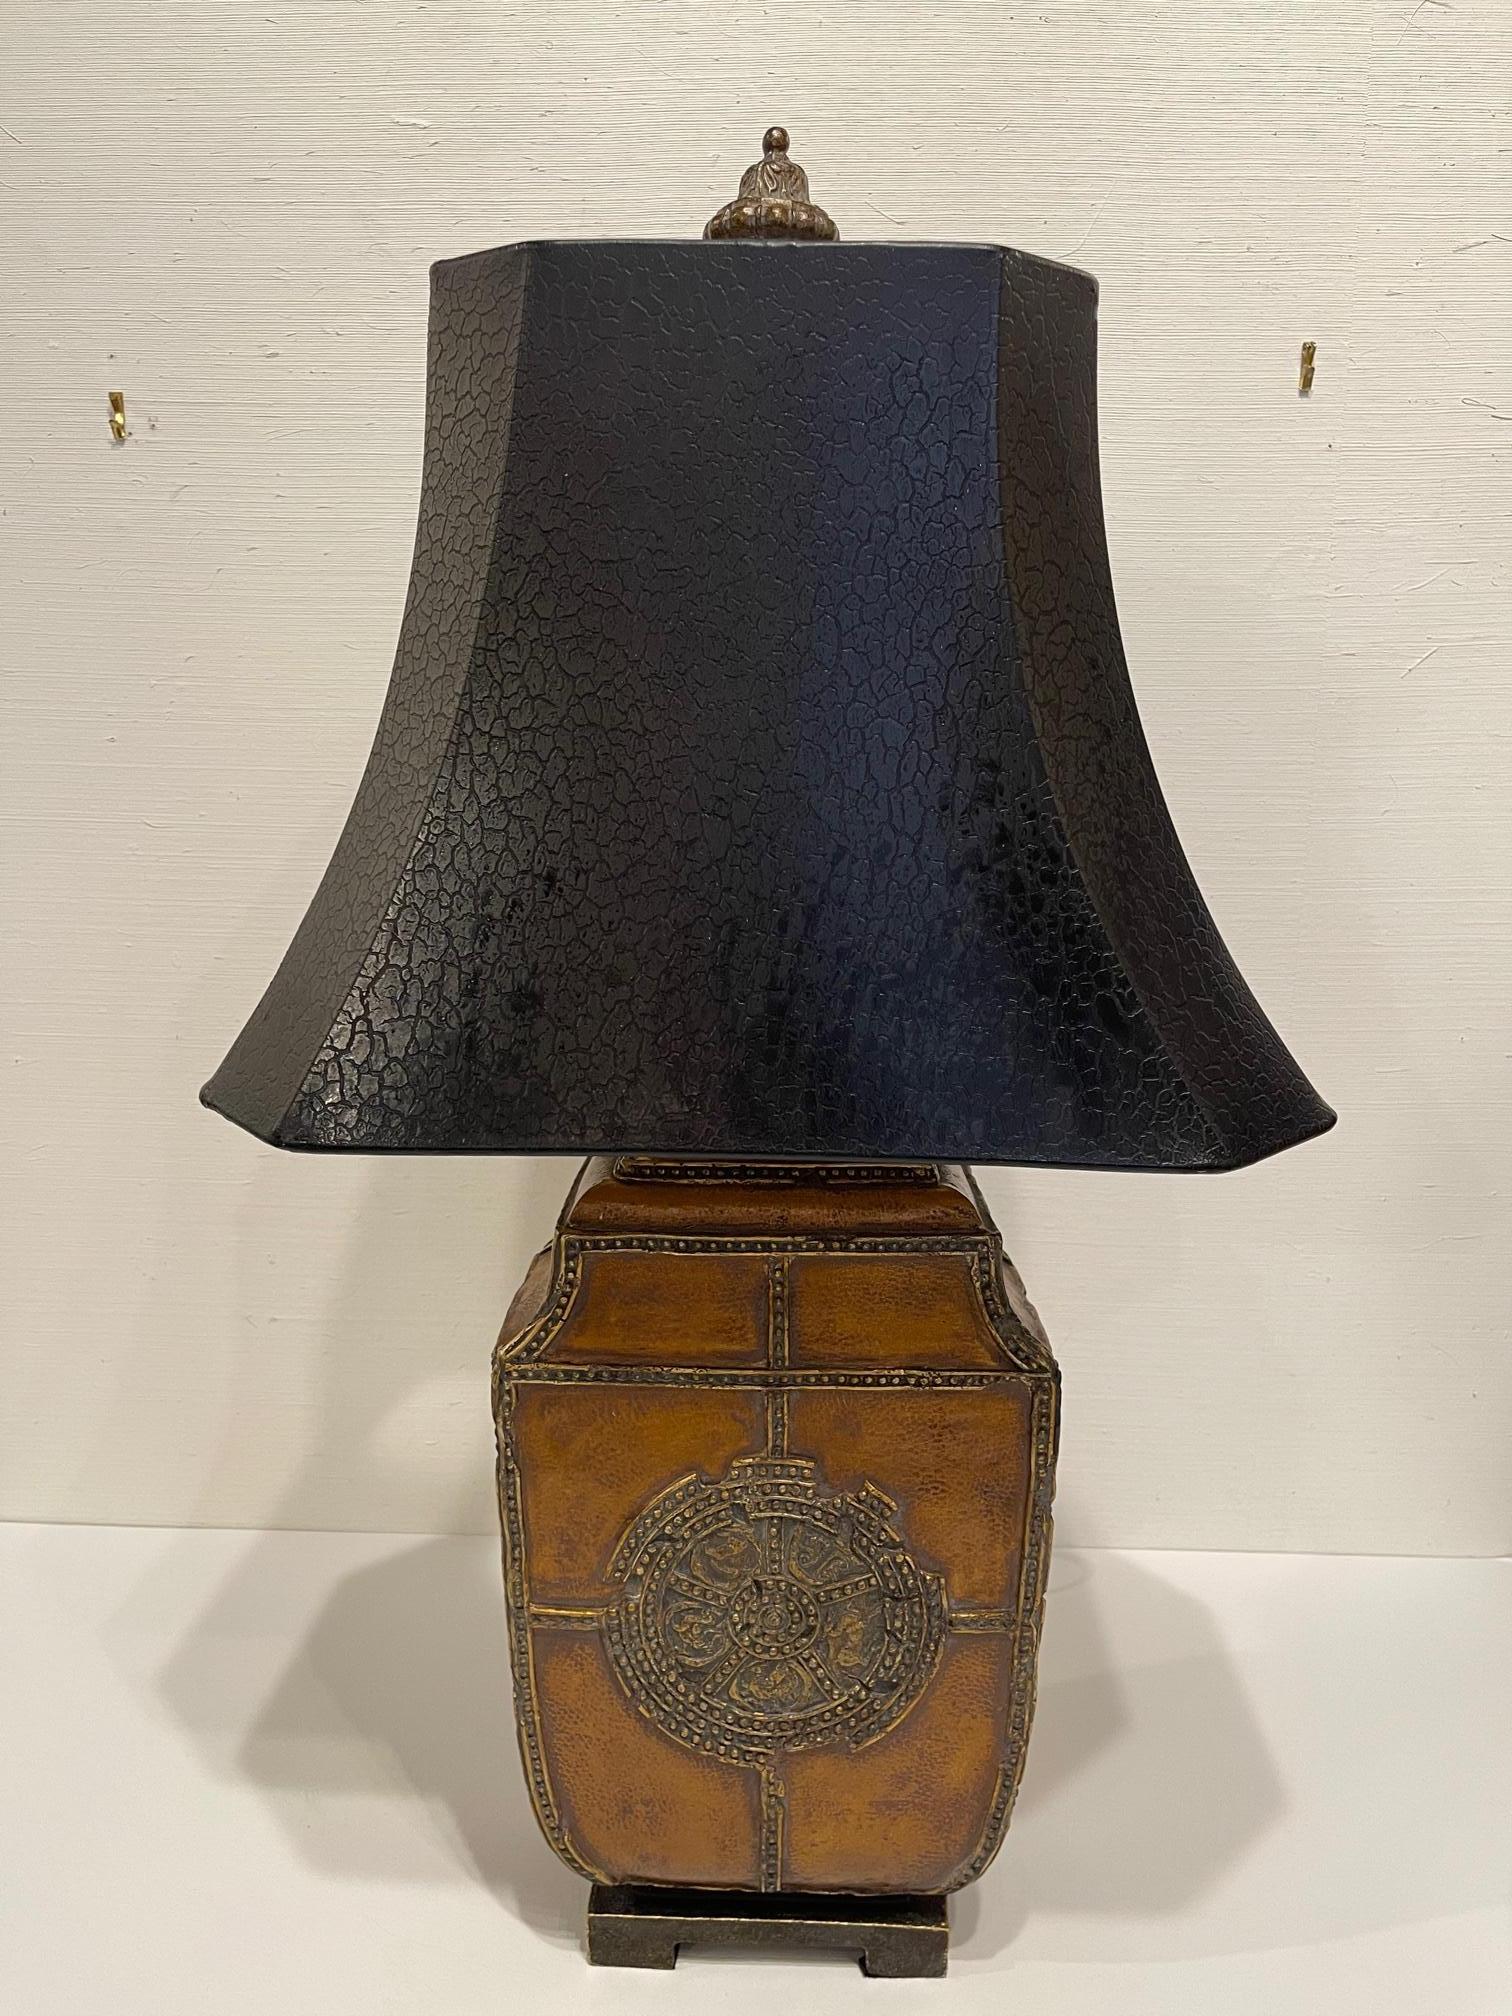 Chinese style leather lamp with a black shade, 20th century.